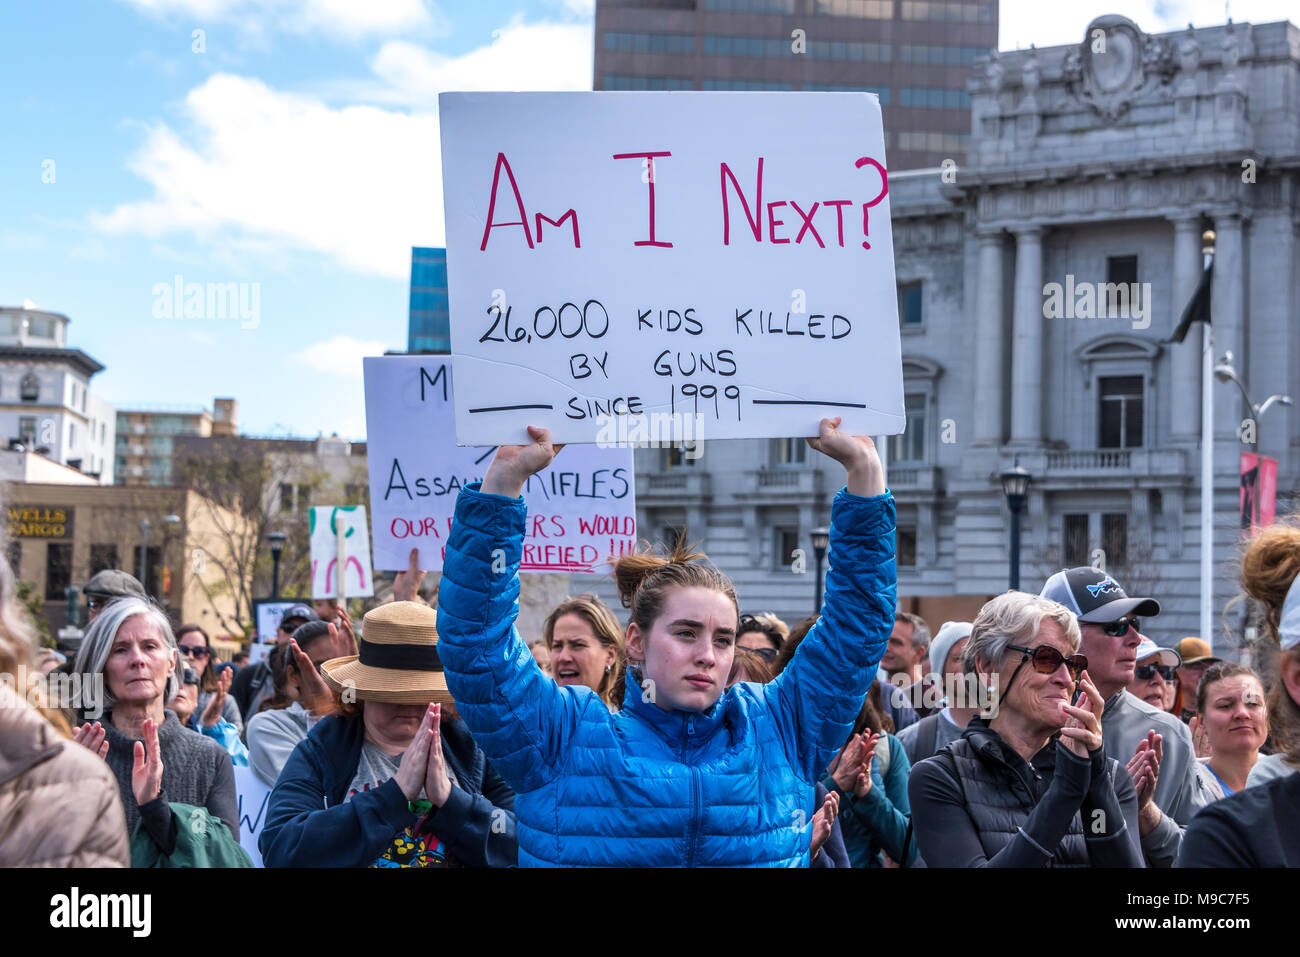 San Francisco, USA. 24th March, 2018. At the March for Our Lives rally and march to call for gun control and end gun violence, a young woman teenage student holds a sign reading, 'Am I next?' with the statistic of 26,000 kids killed by guns since 1999. Shelly Rivoli/Alamy Live News Stock Photo